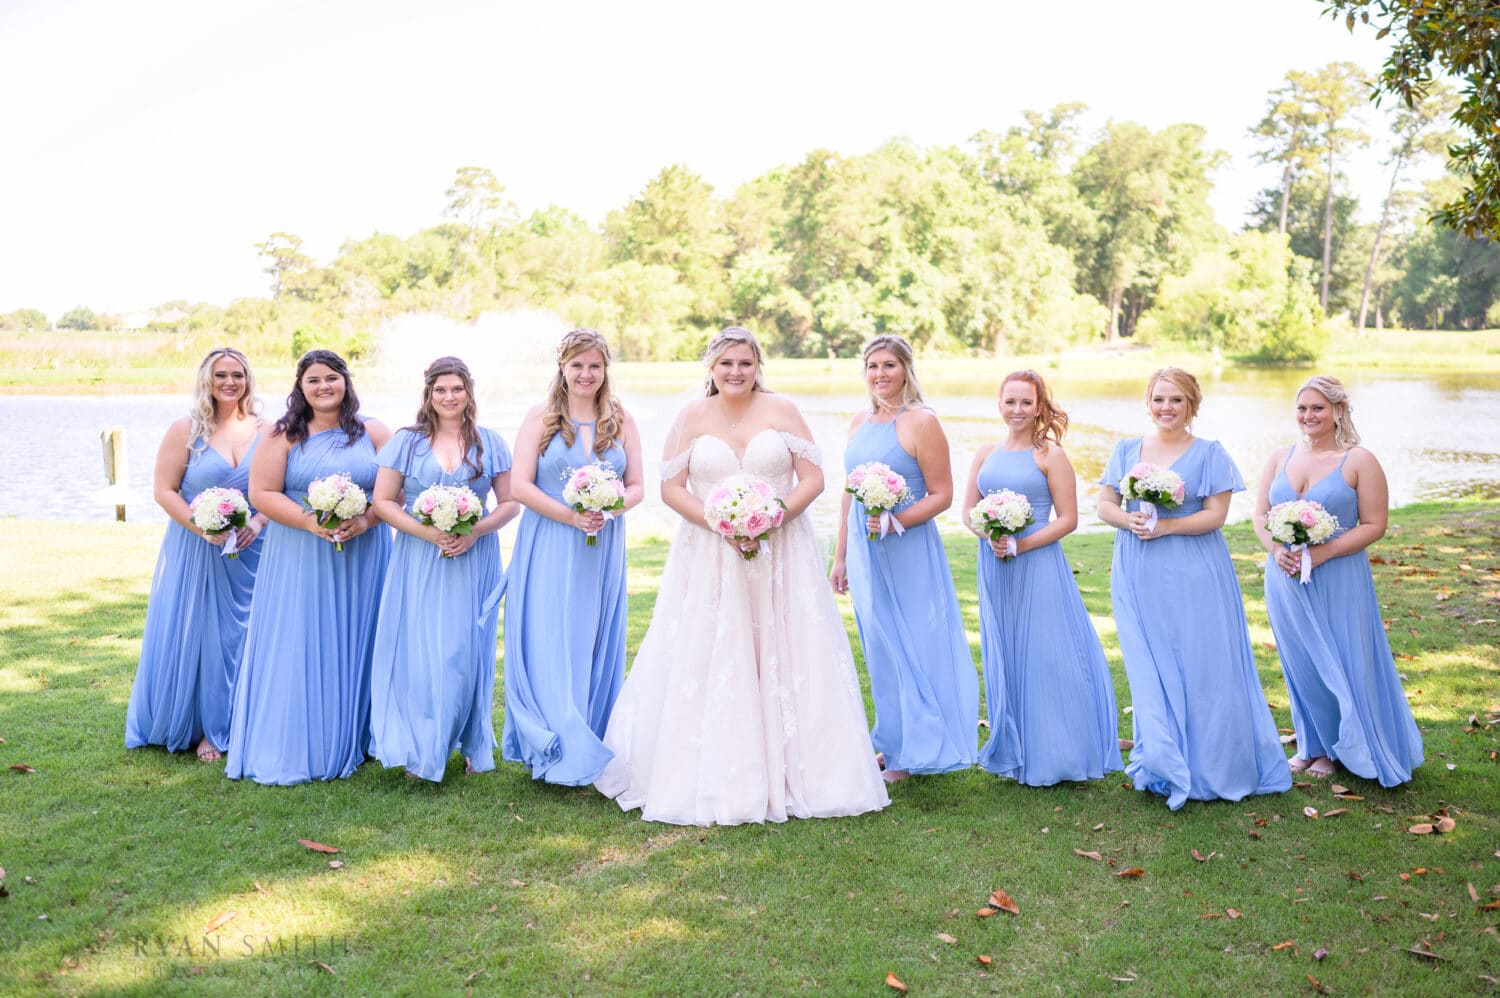 Pictures with the bridal party - Pawleys Plantation